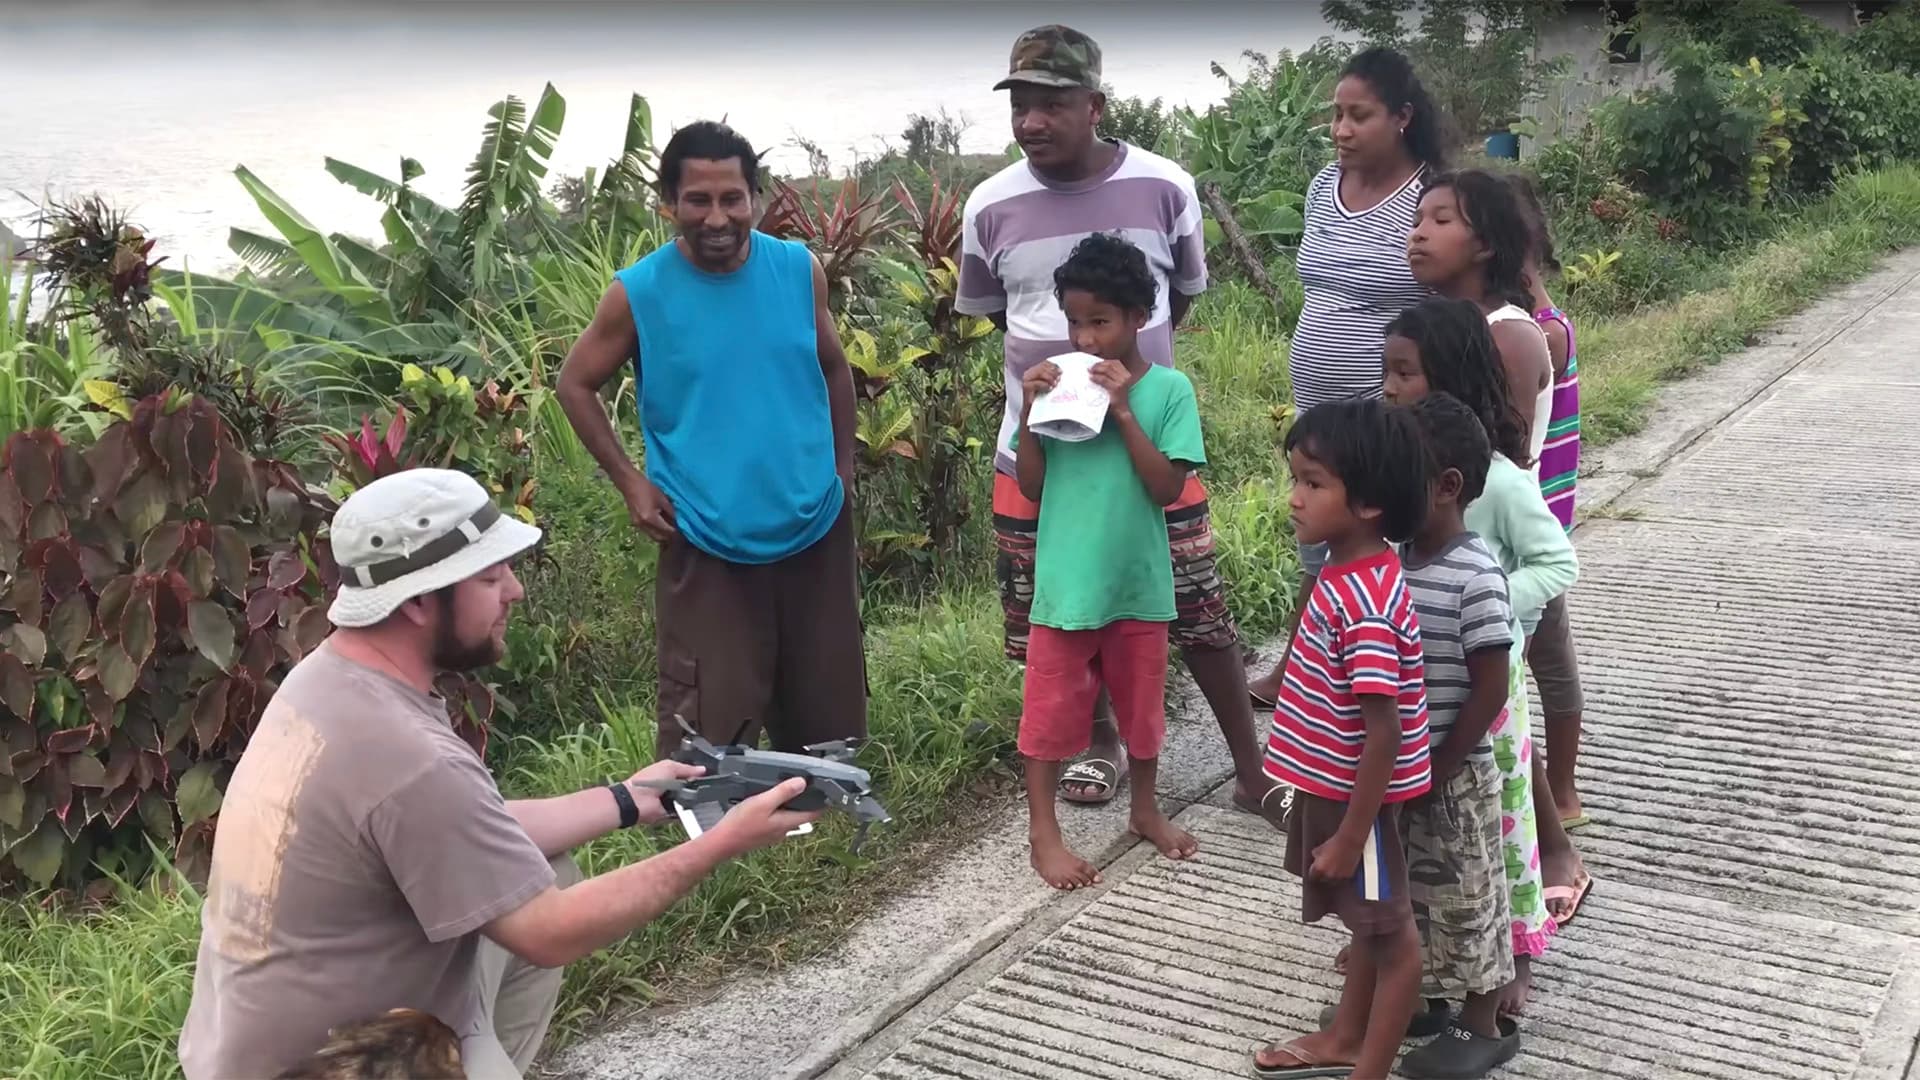 University of Maryland UAS Test Site pilot Ryan Henderson shows residents of Dominica a drone he used in early 2018 to create imagery of damage following Hurricane Maria, which struck the island in 2017.